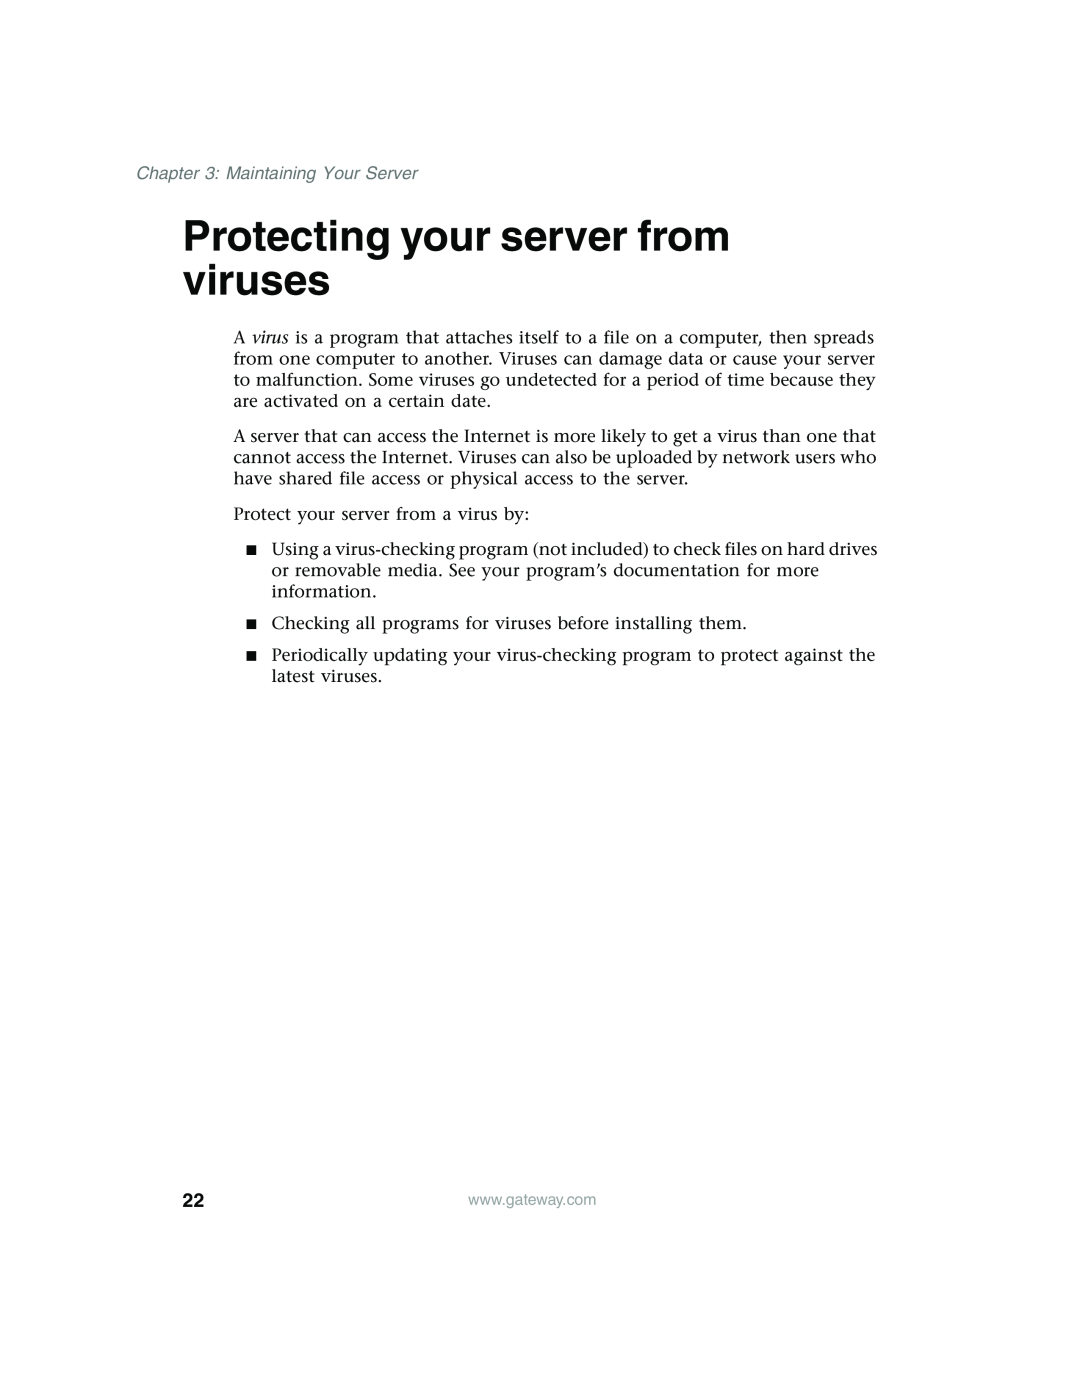 Gateway 960 manual Protecting your server from viruses, Maintaining Your Server 